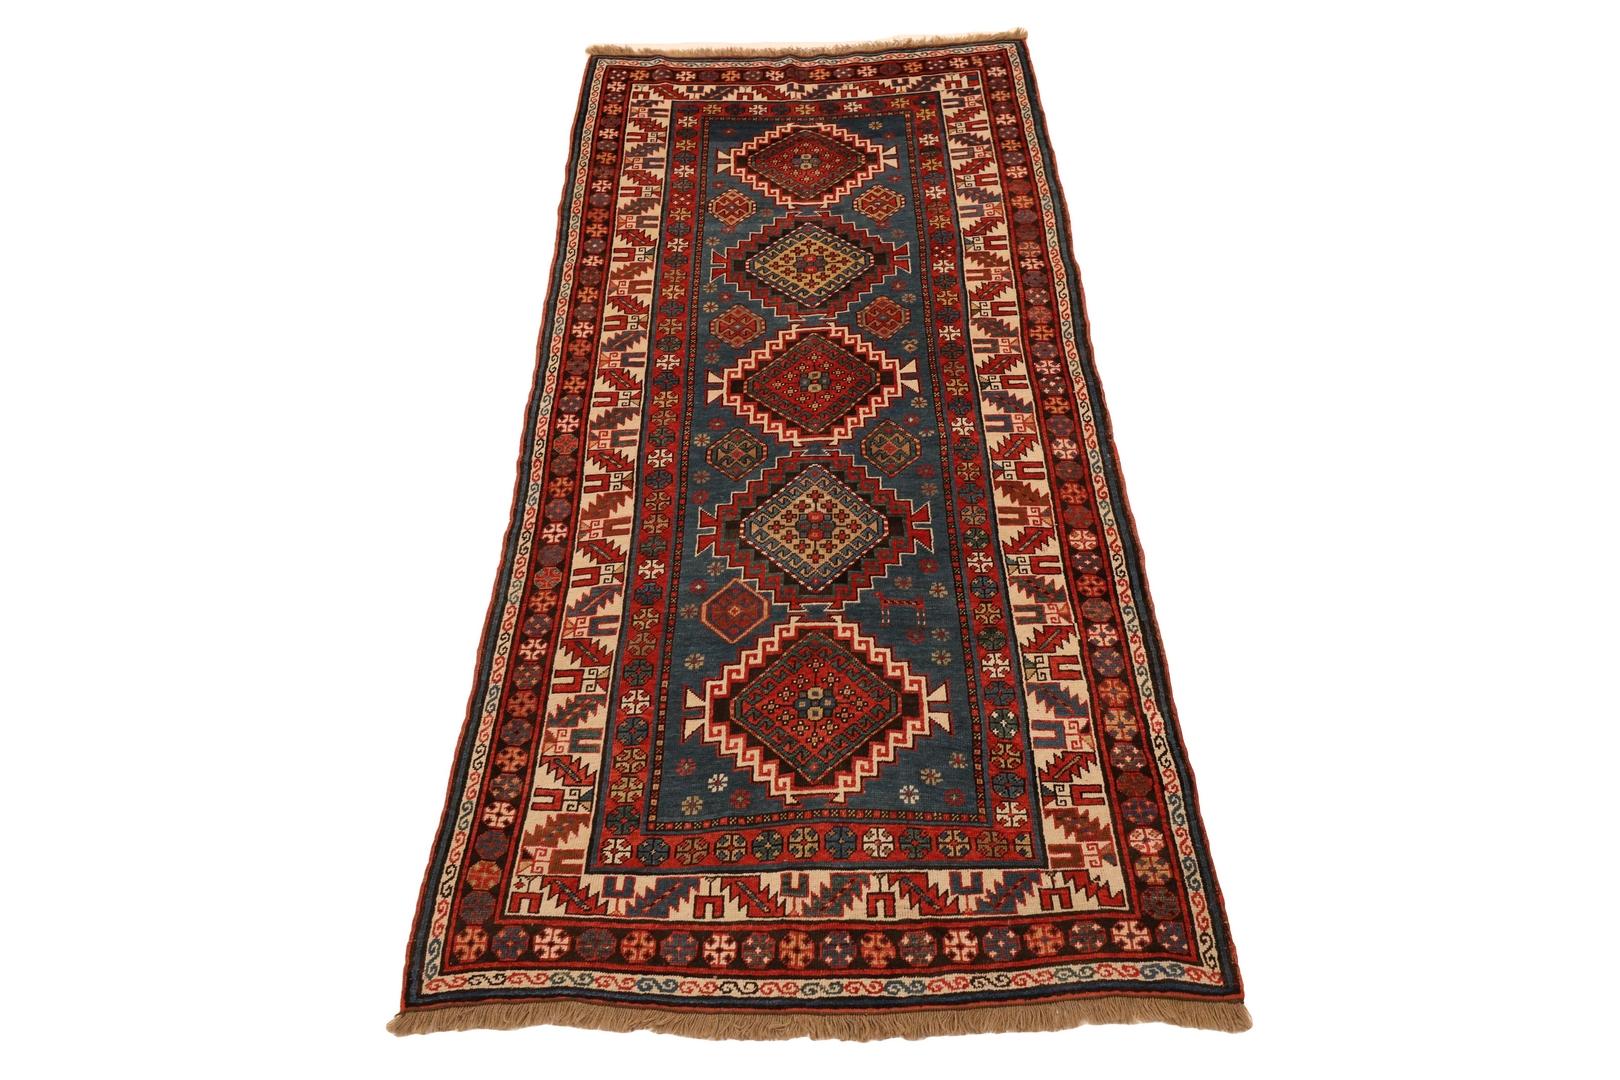 Introducing the Kazak Cornflower Blue Diamond Medallion Runner - a true masterpiece of craftsmanship and design. This exquisite rug boasts a stunning cornflower blue background that forms the canvas for a symphony of colors and patterns, making it a